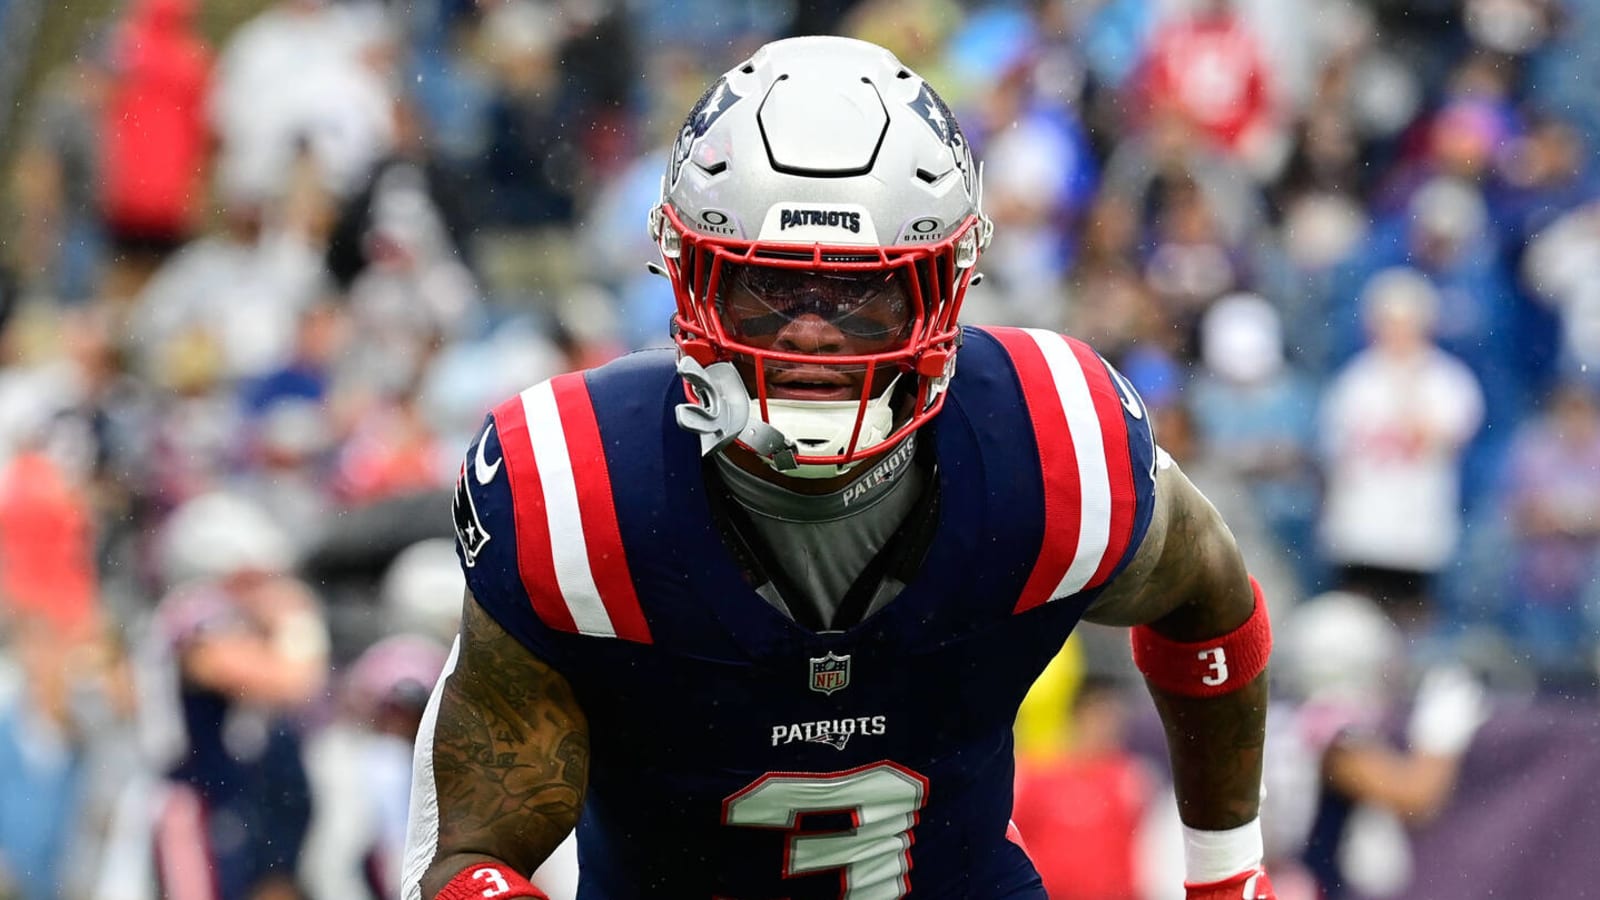 Patriots LB shares player reactions to Belichick departure